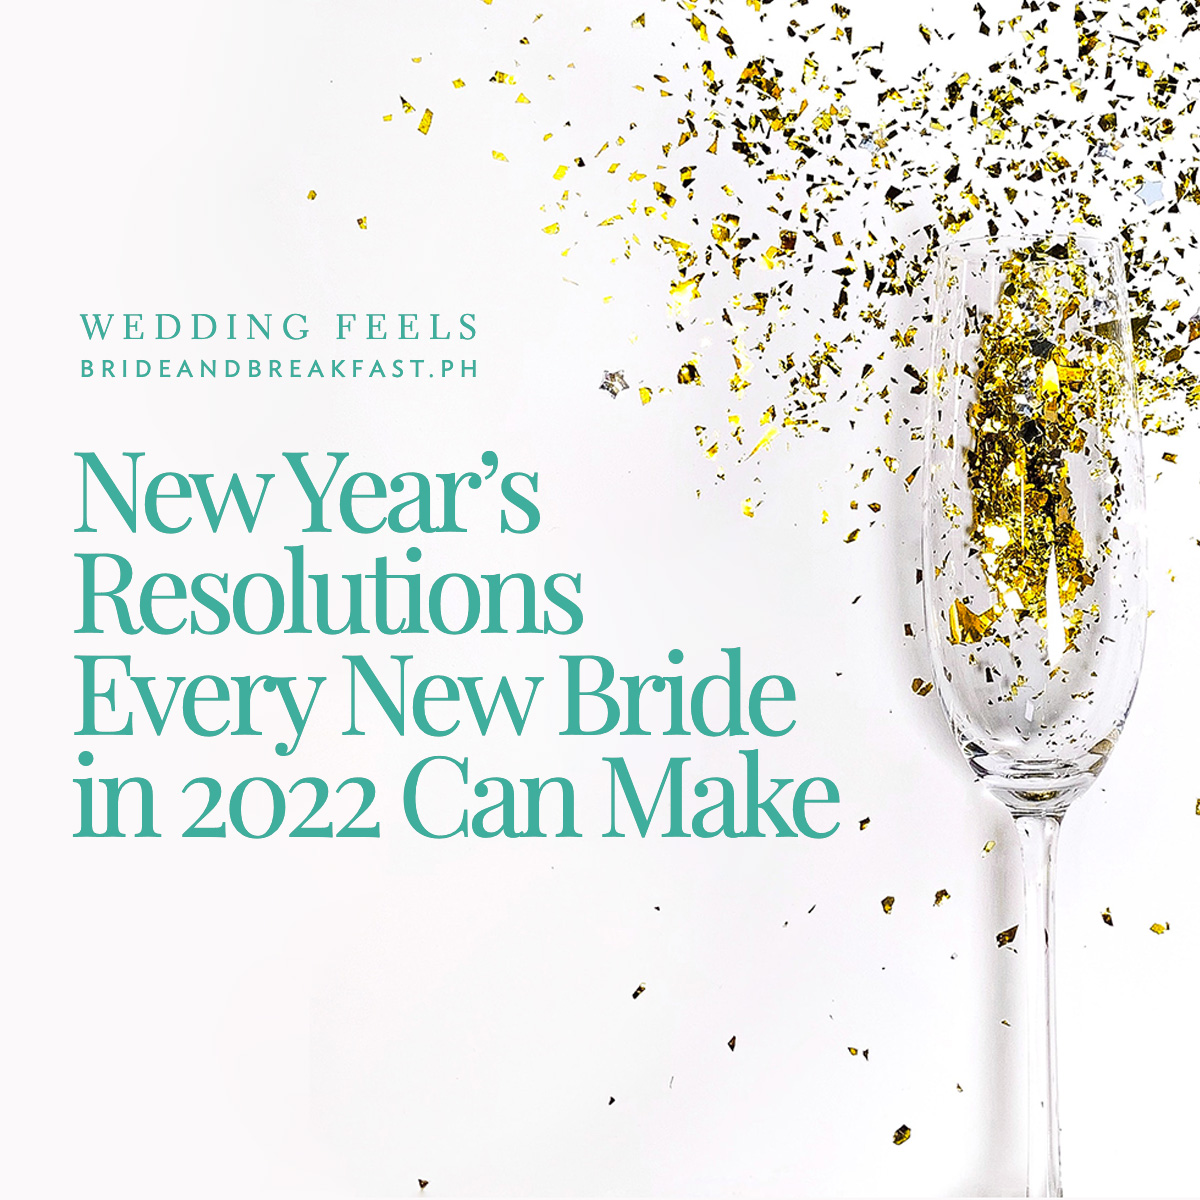 New Year’s Resolutions Every New Bride in 2022 Can Make